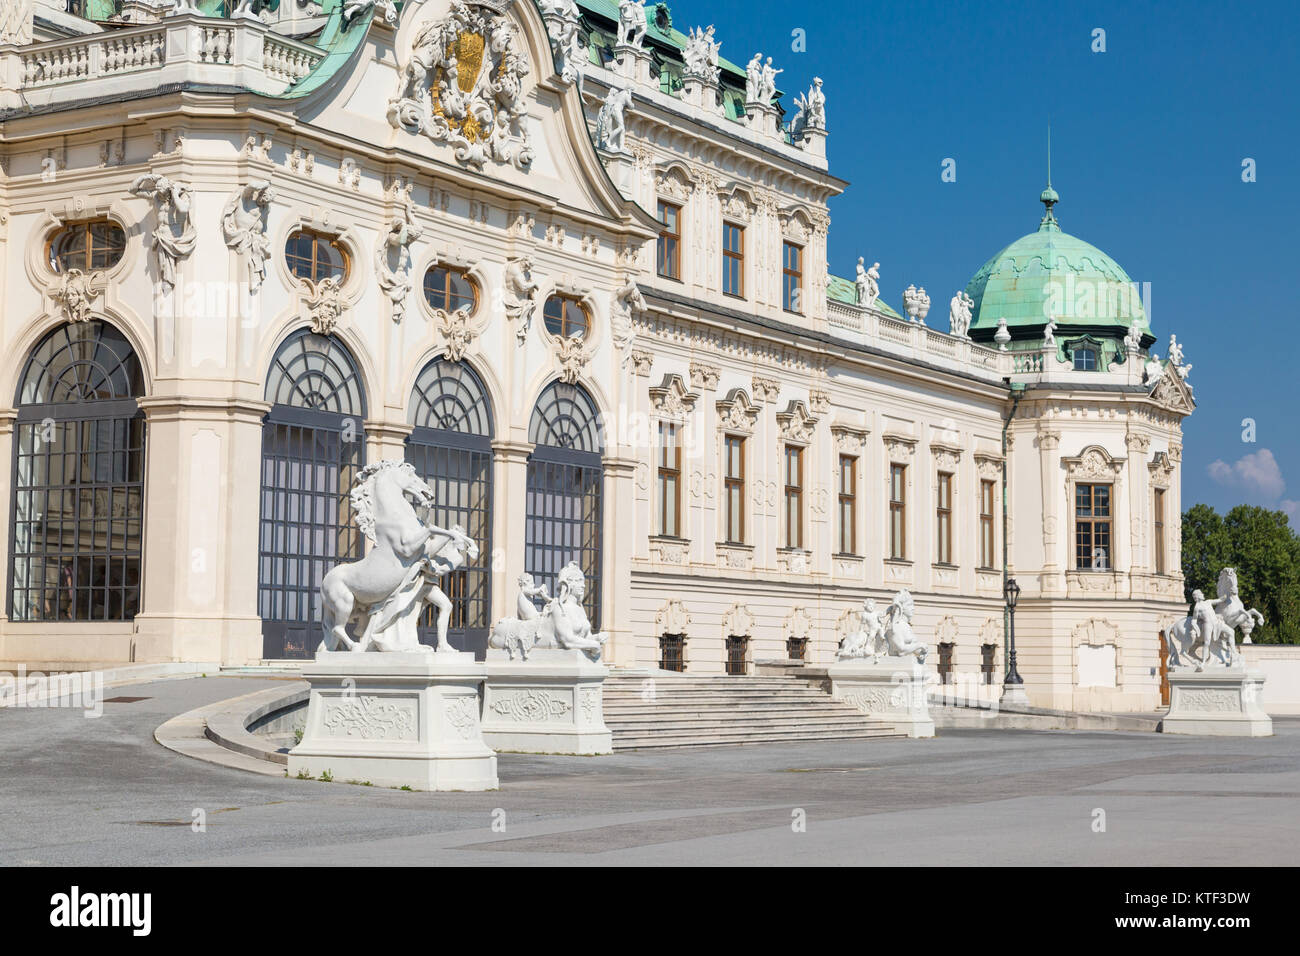 View with Belvedere Palace (Schloss Belvedere) Built in Baroque